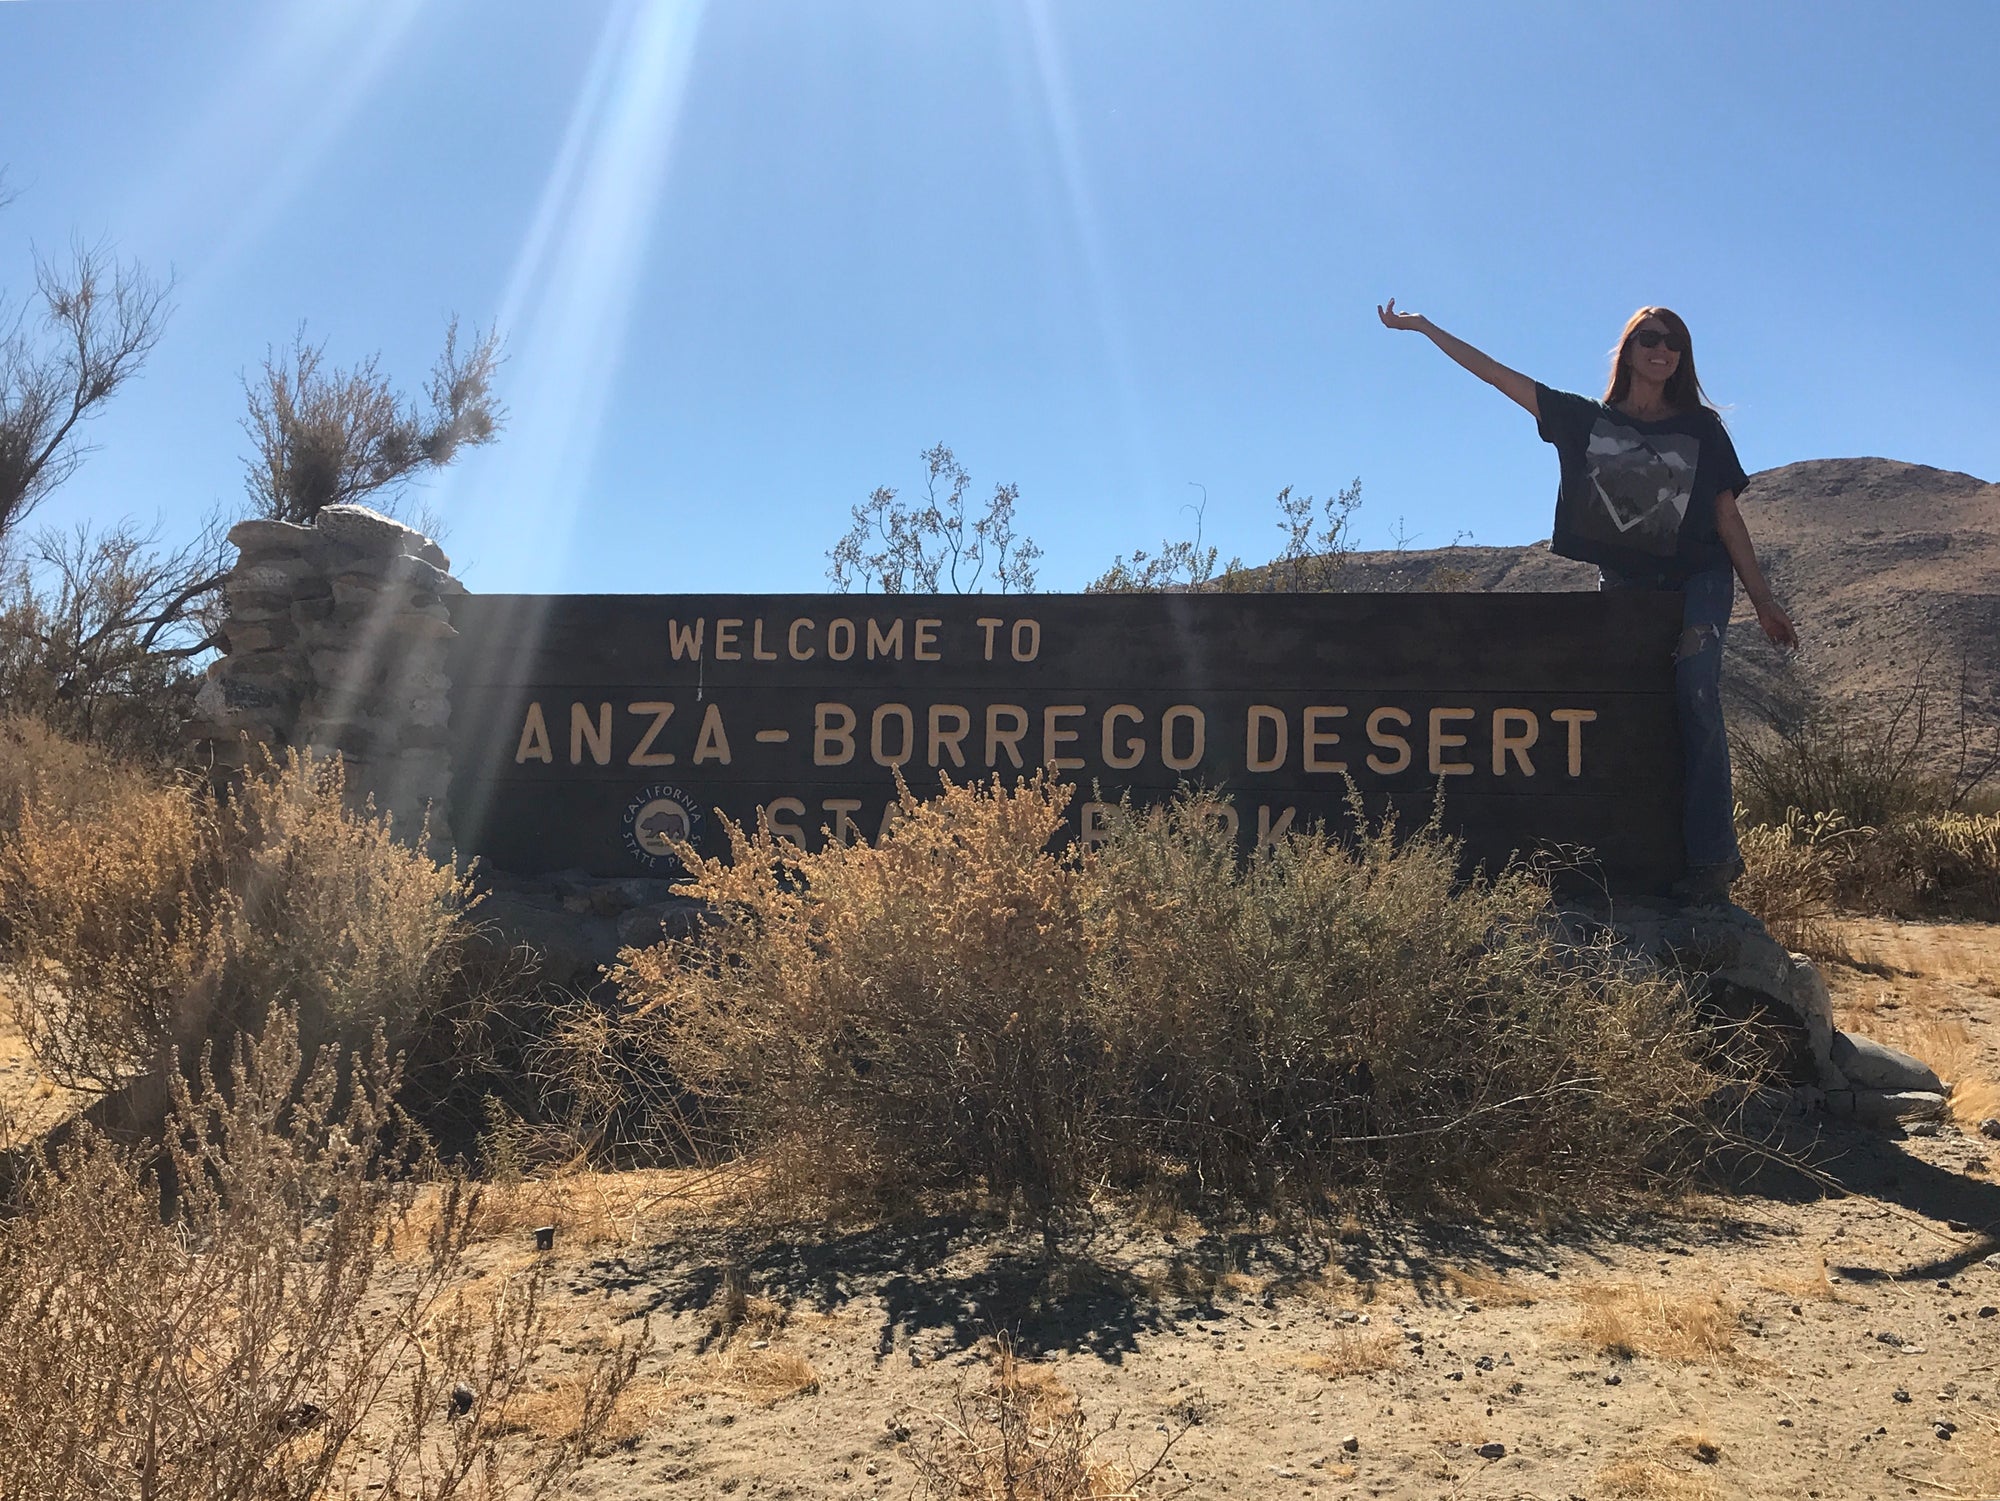 visitor poses beside the welcome sign to the woman poses for photo running away from a dinosaur sculpture in the anza-borrego desert